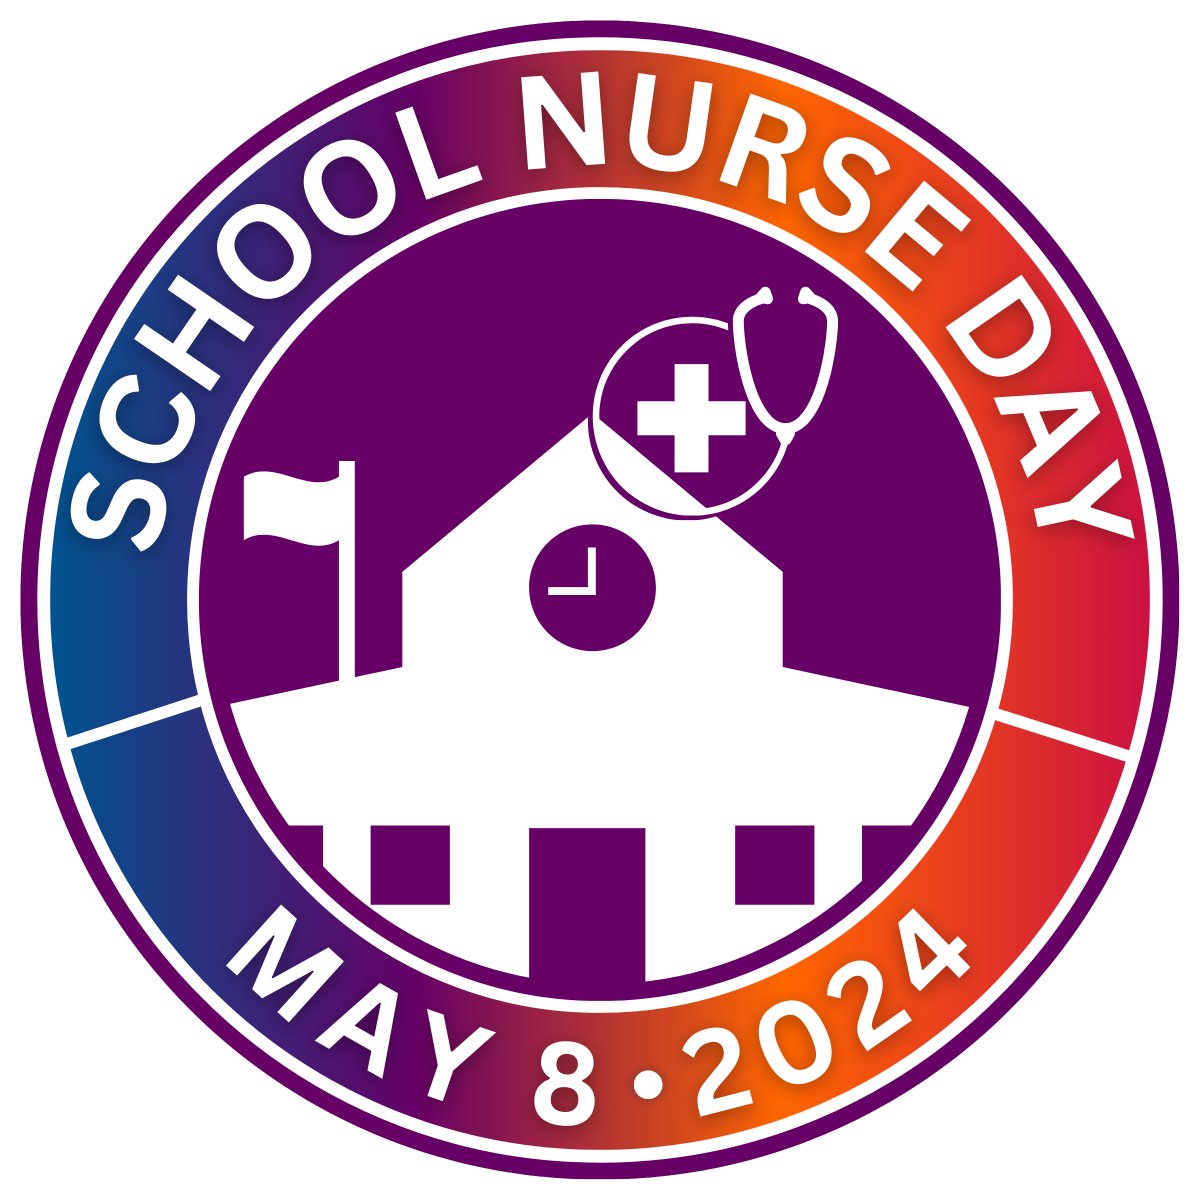 Thank you to all school nurses on #NationalSchoolNurseDay! We can’t wait to meet many @schoolnurses at #NASN2024!